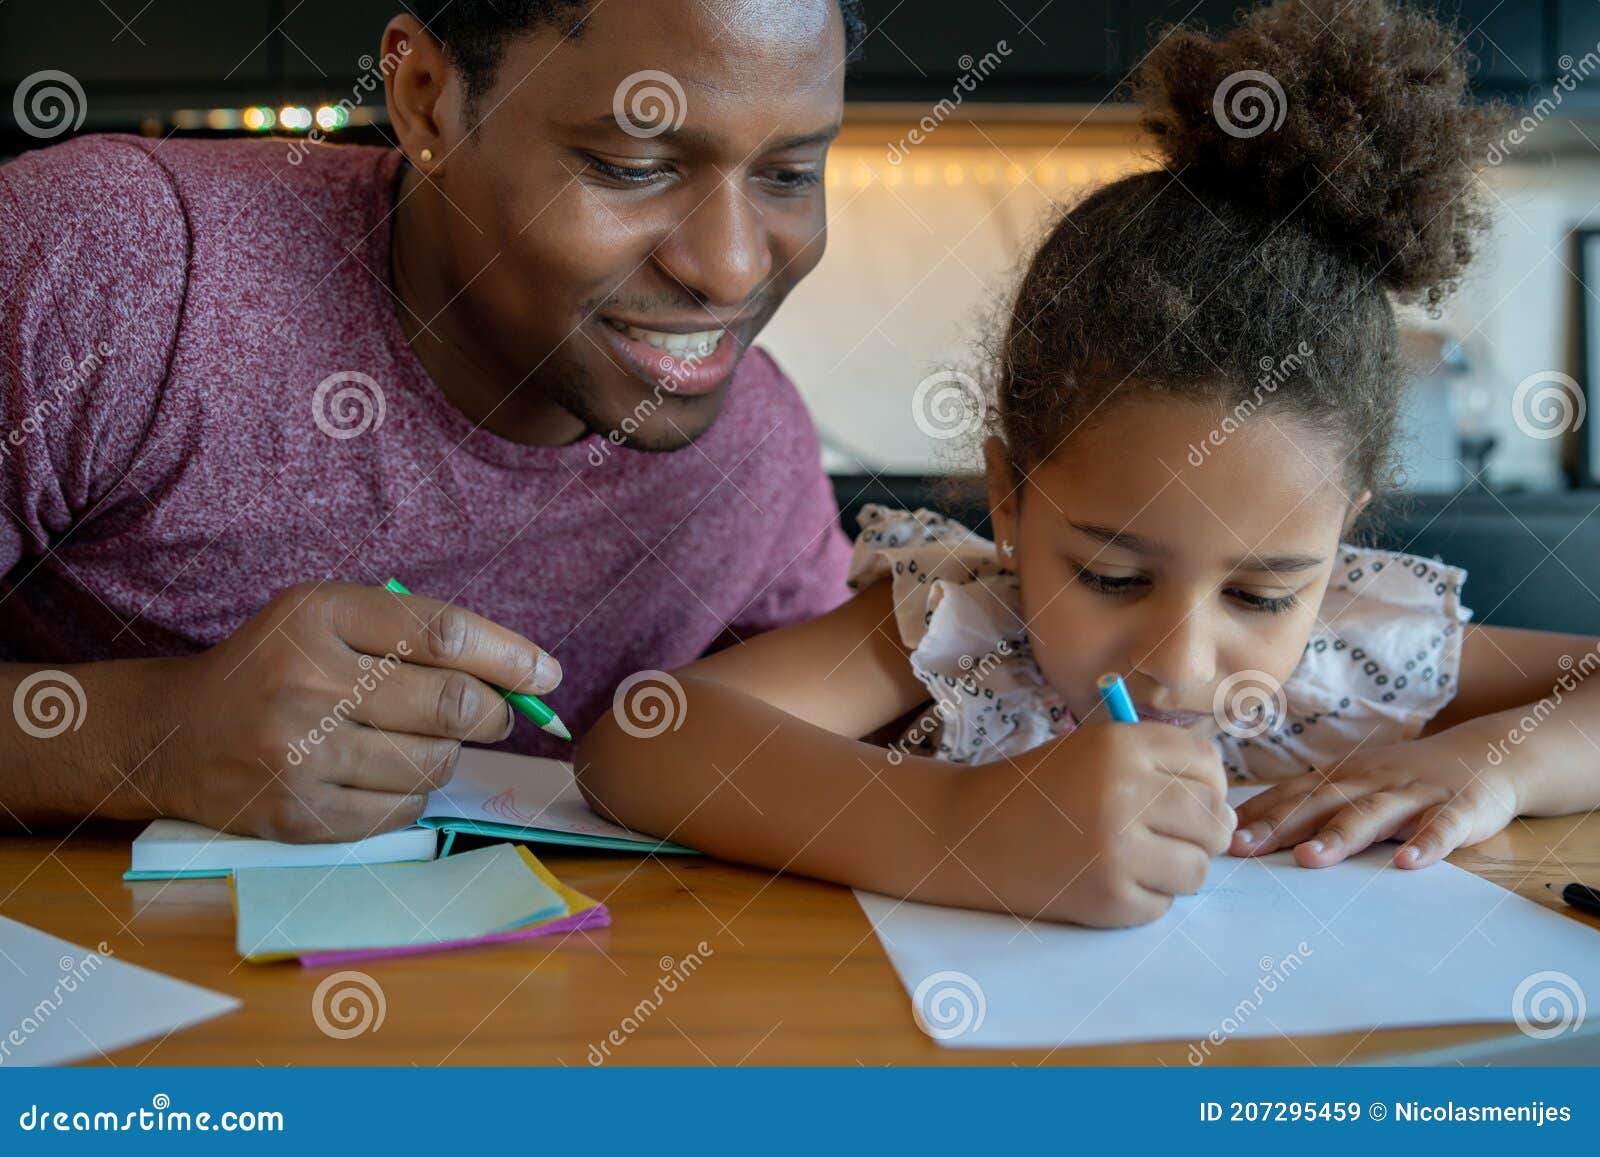 a father helping his daughter with homeschool.